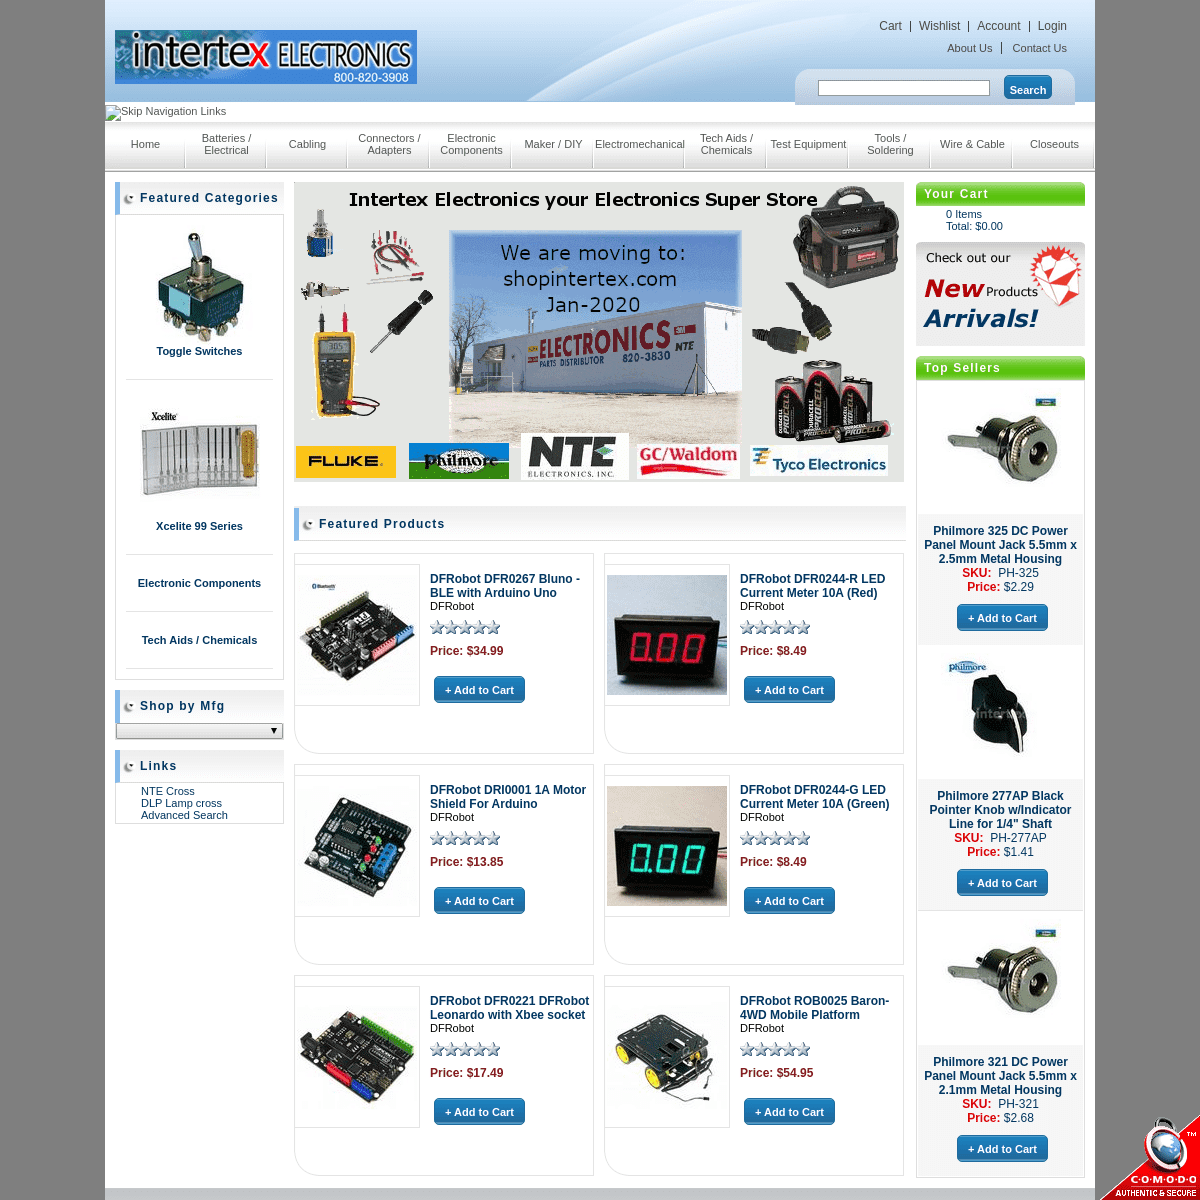 A complete backup of intertexelectronics.com